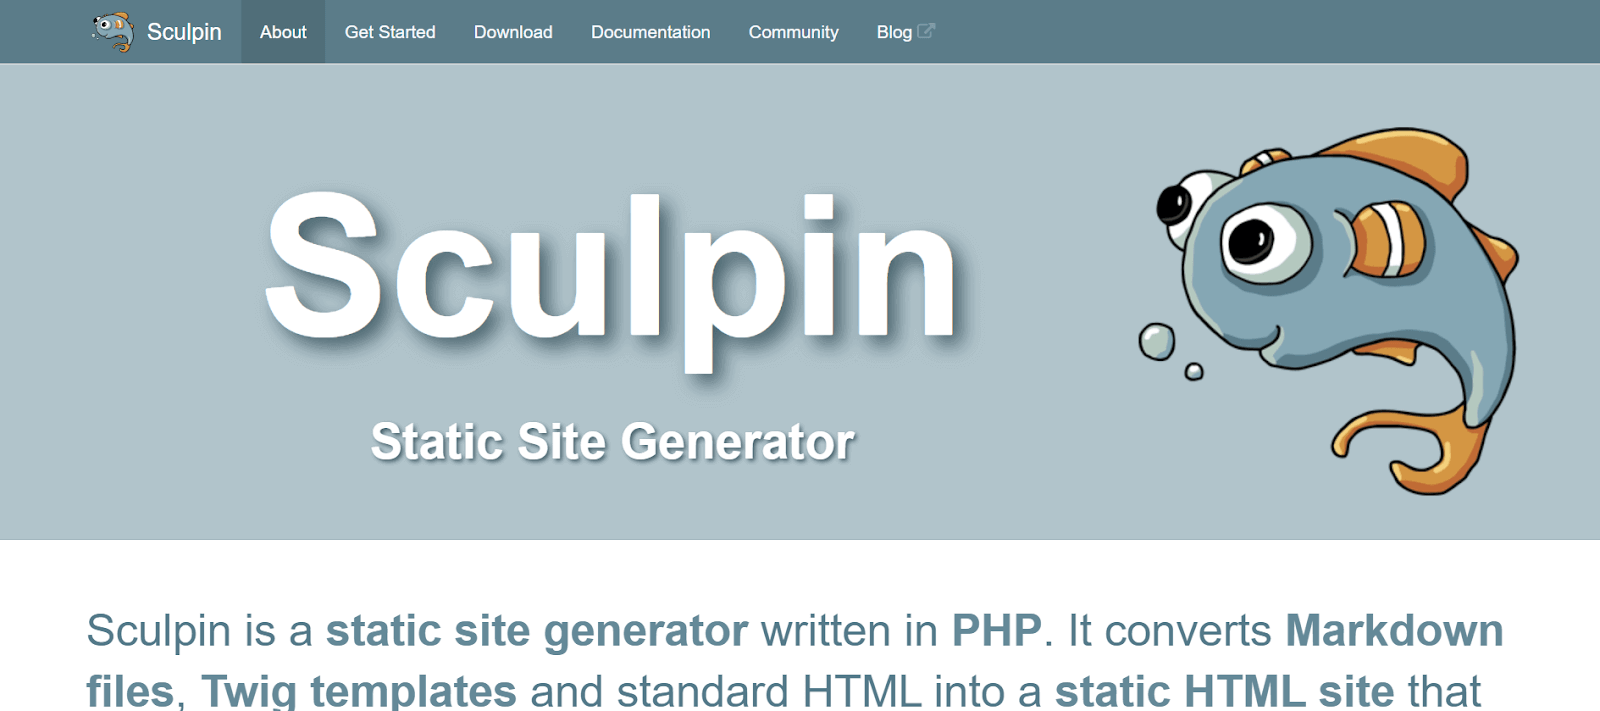 Sculpin is designed  built using the Symfony framework in PHP